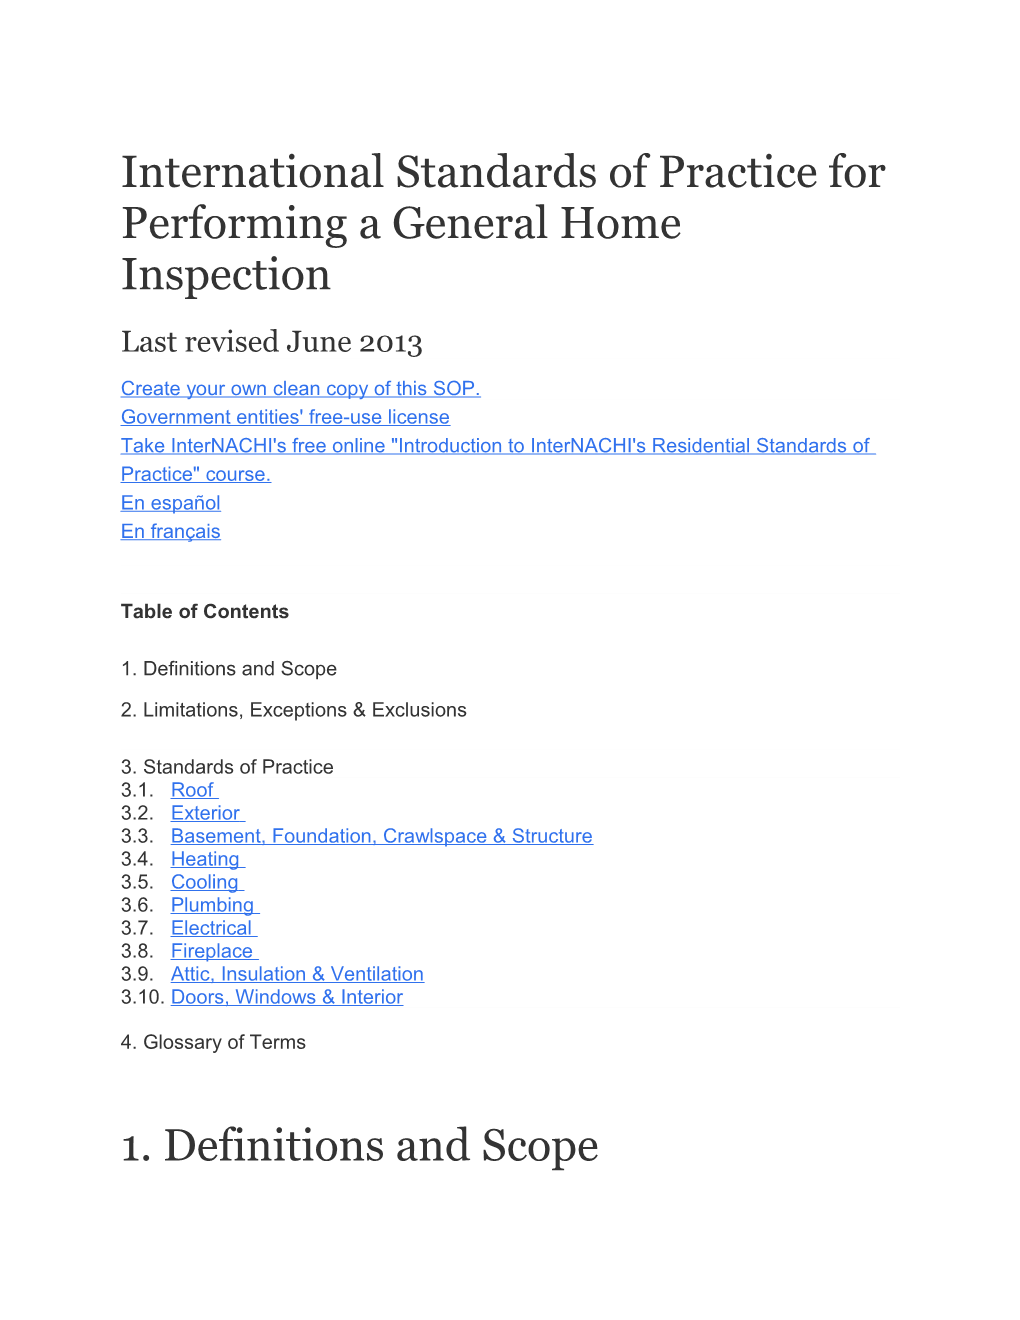 International Standards of Practice for Performing a General Home Inspection